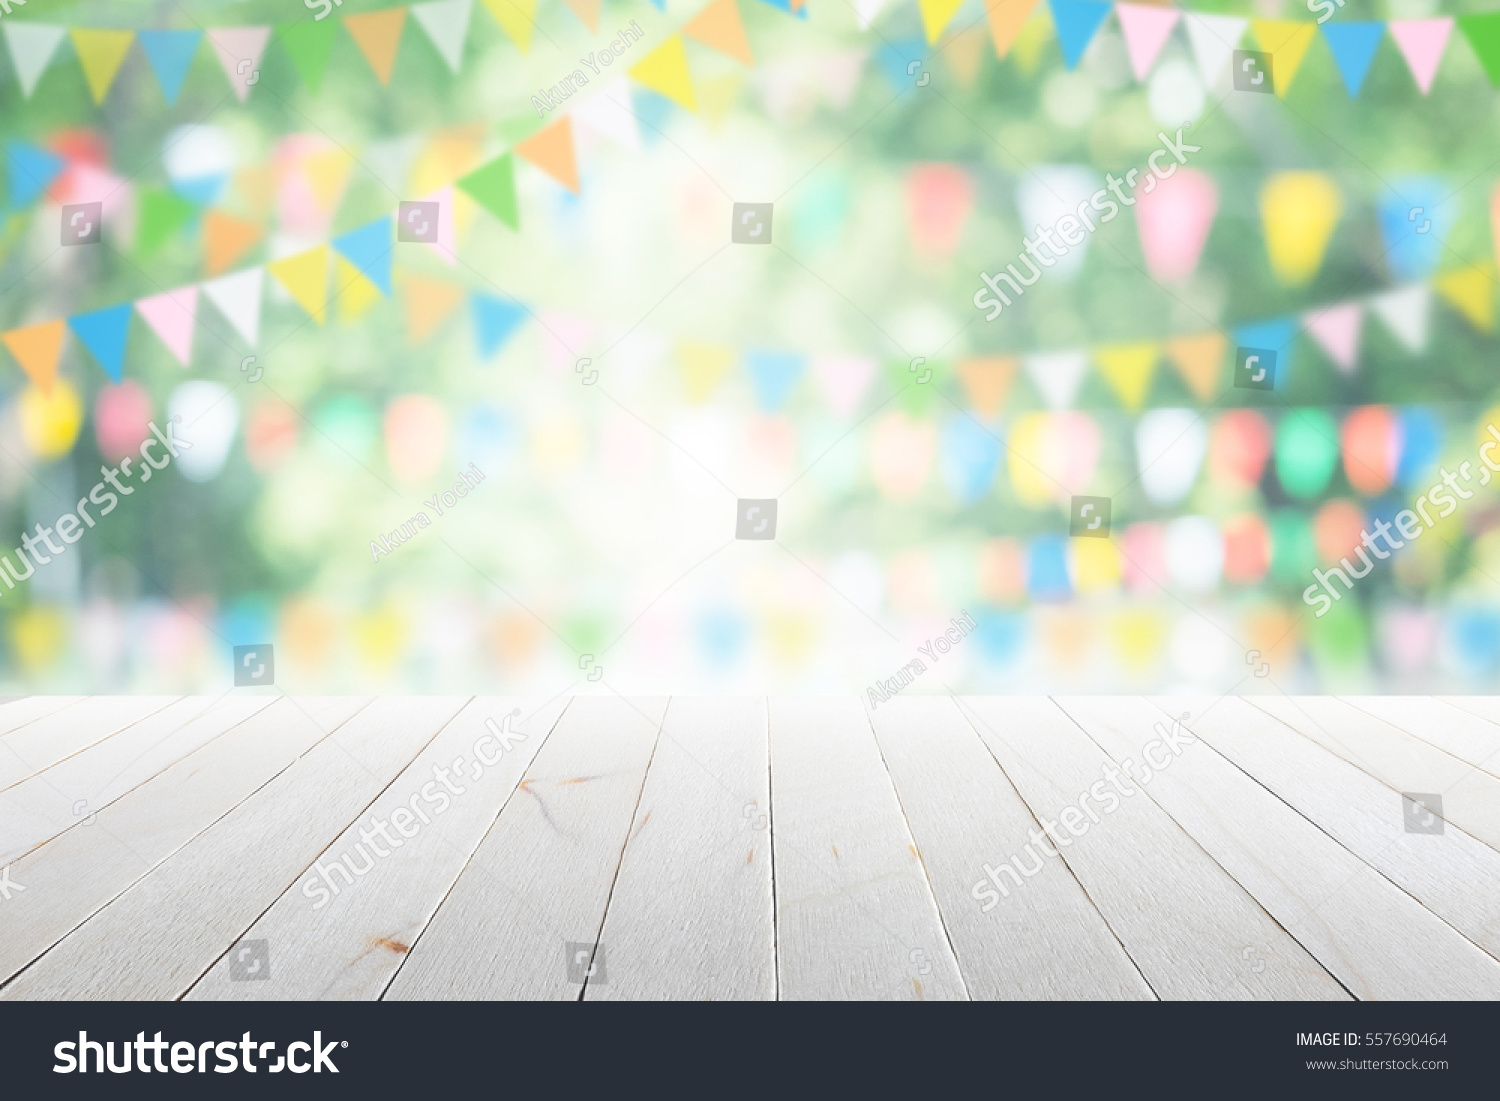 Empty party table Images, Stock Photos & Vectors | Shutterstock